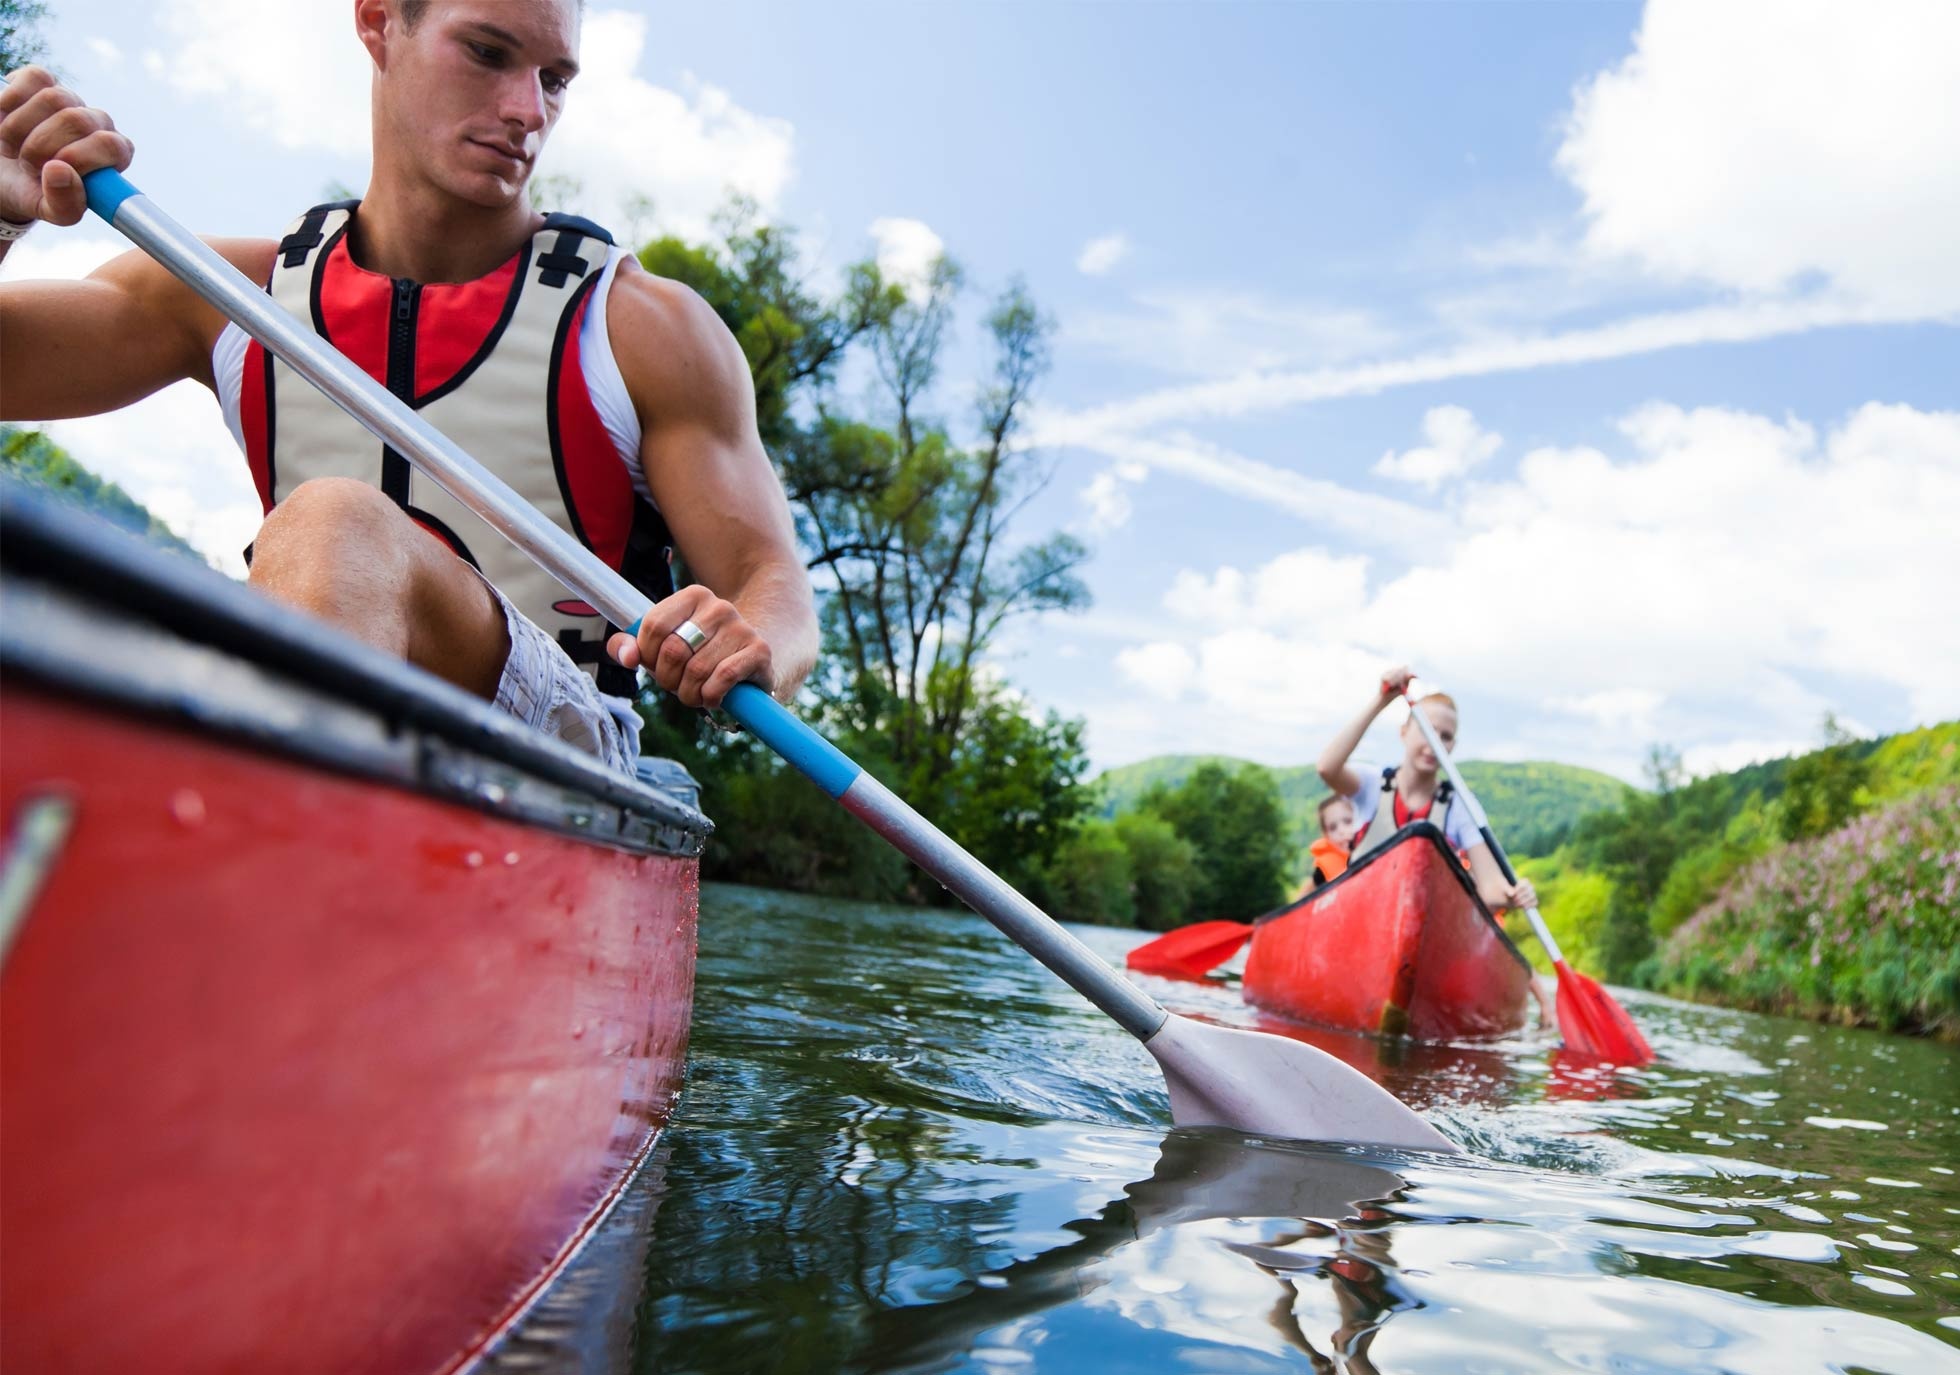 Canoeing: An official Olympic sport and a recreational outdoor activity. 1960x1380 HD Wallpaper.